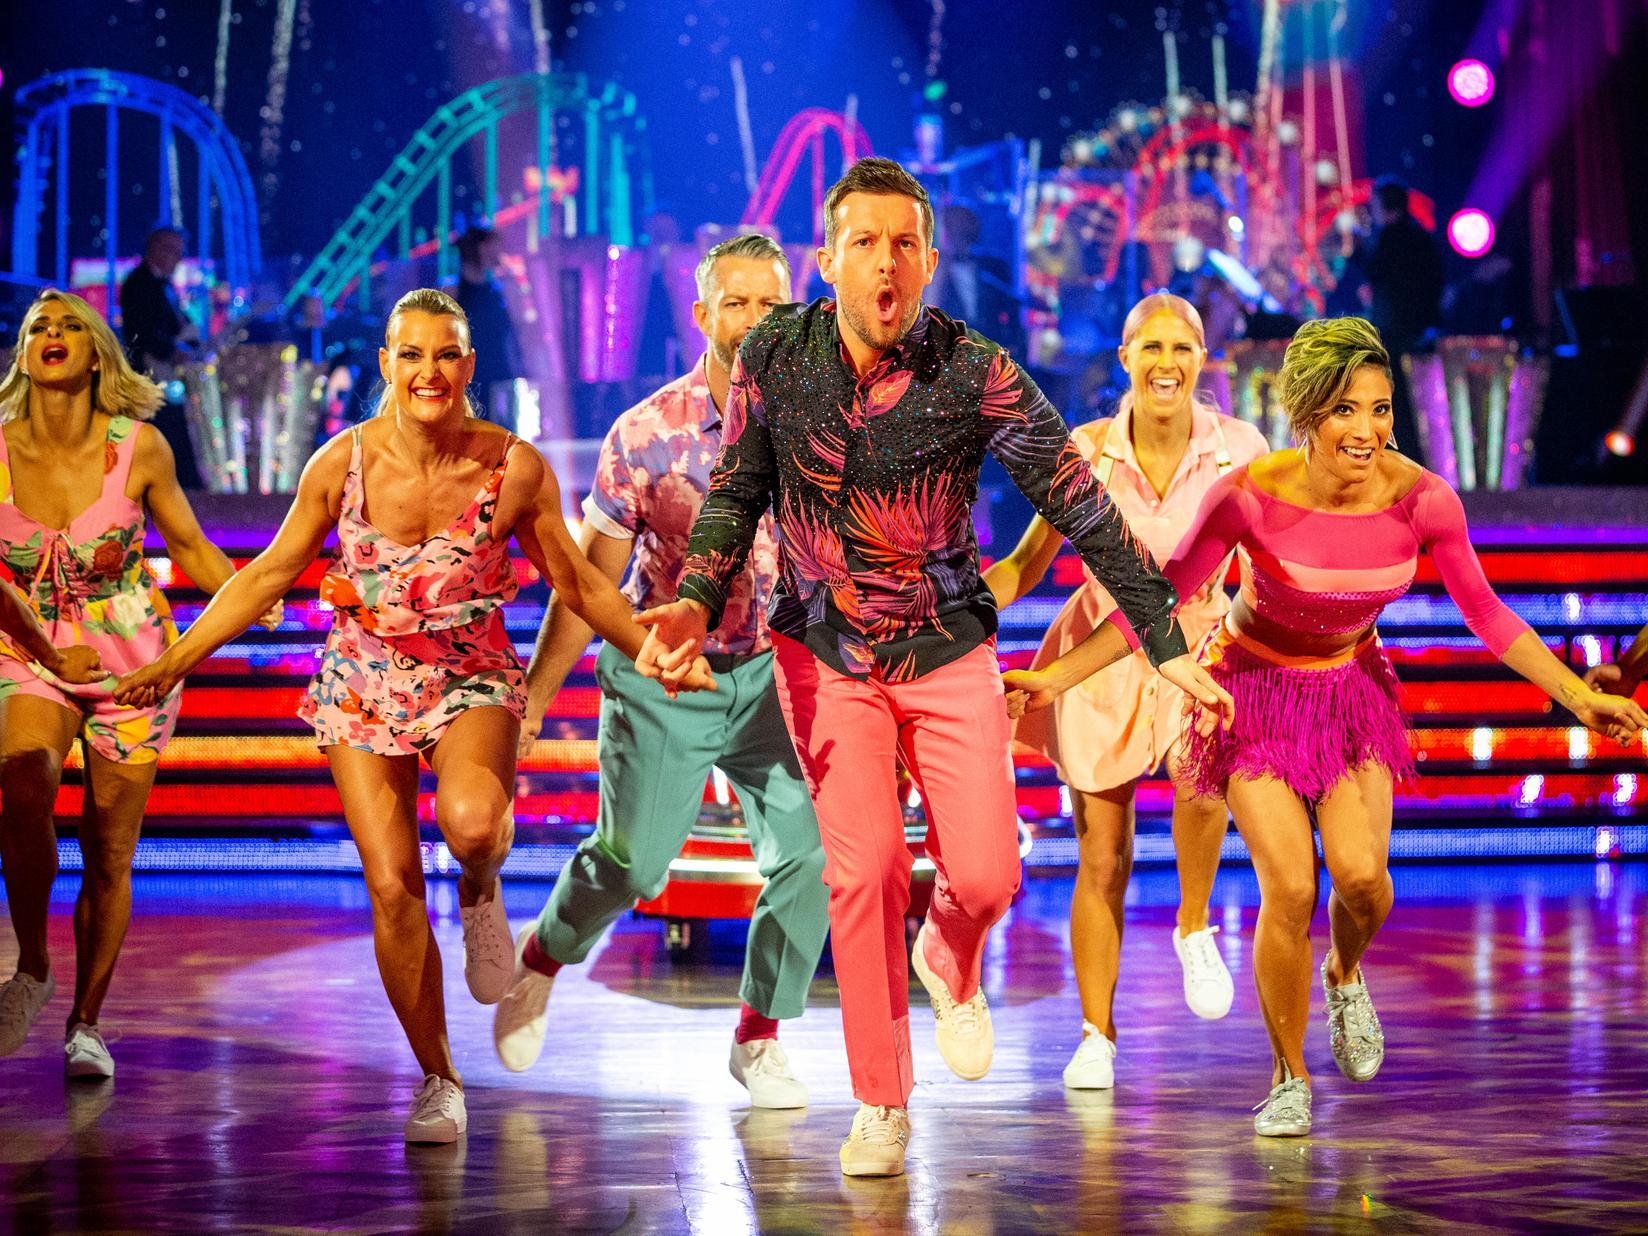 Chris Ramsey and Karen Hauer opened up the show with a bang with a high energy performance to Uptown Funk Picture: Guy Levy